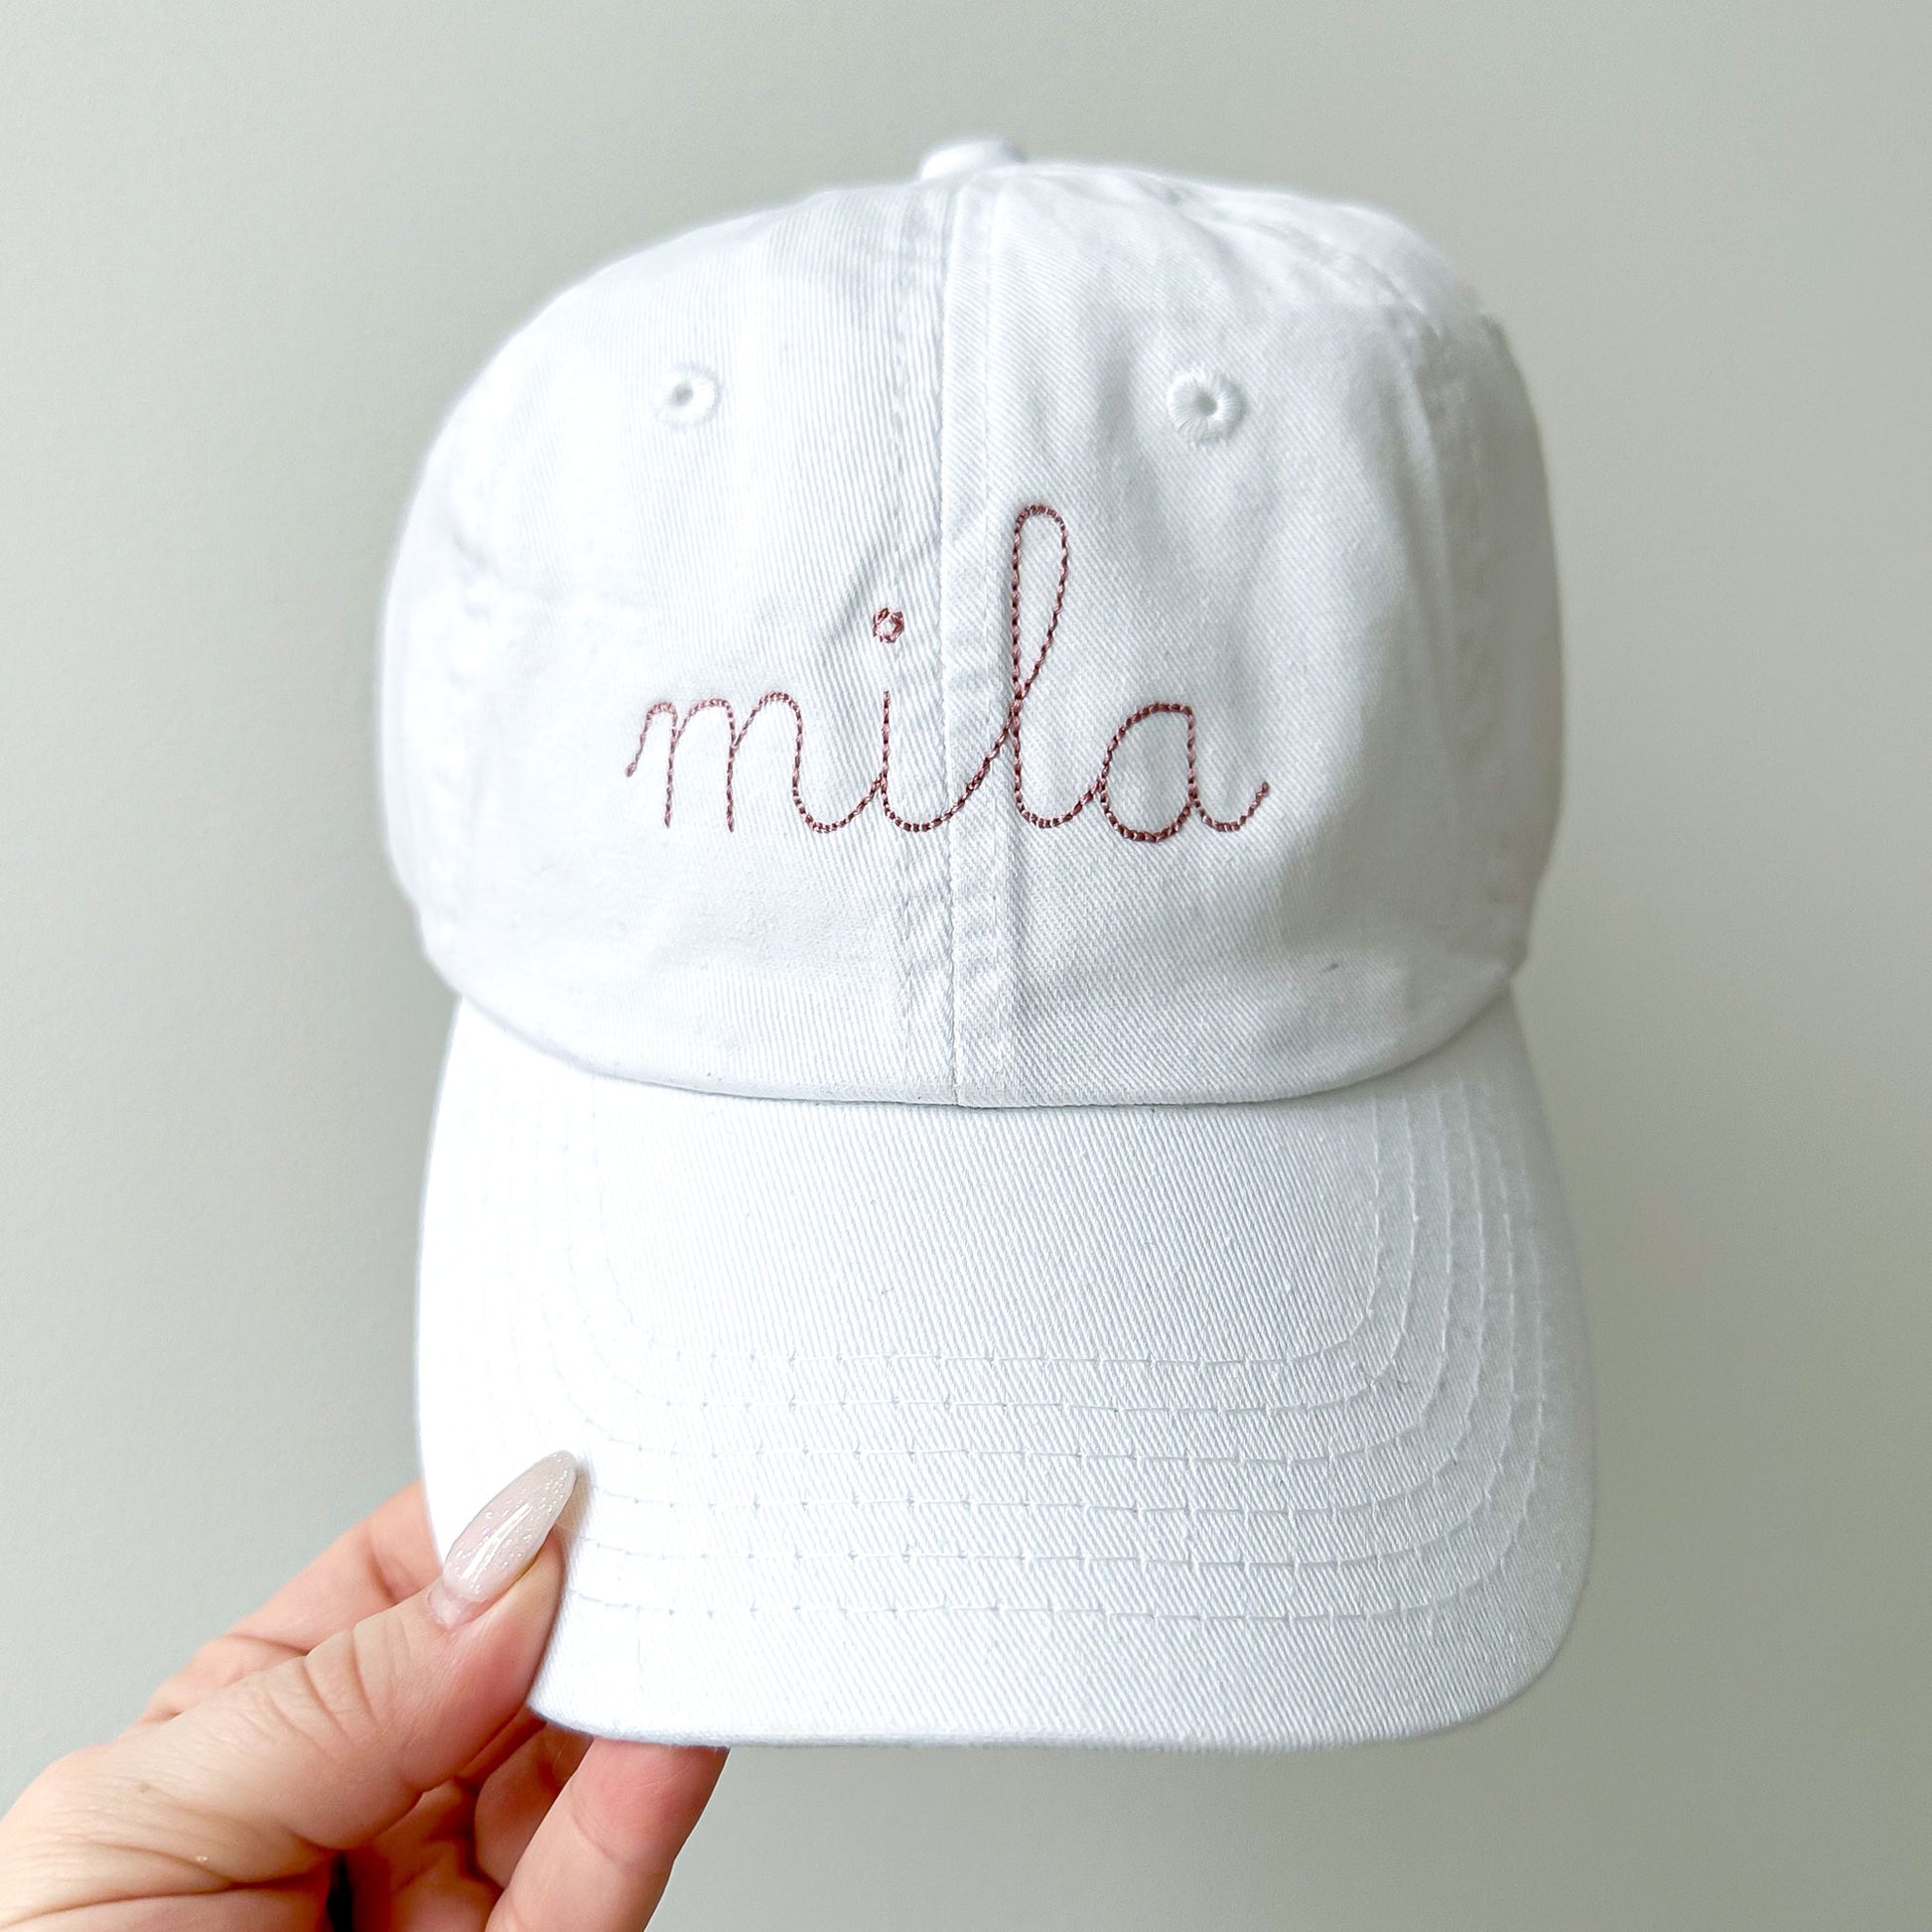 youth white baseball hat with embroidered stitched script name in mauve thread